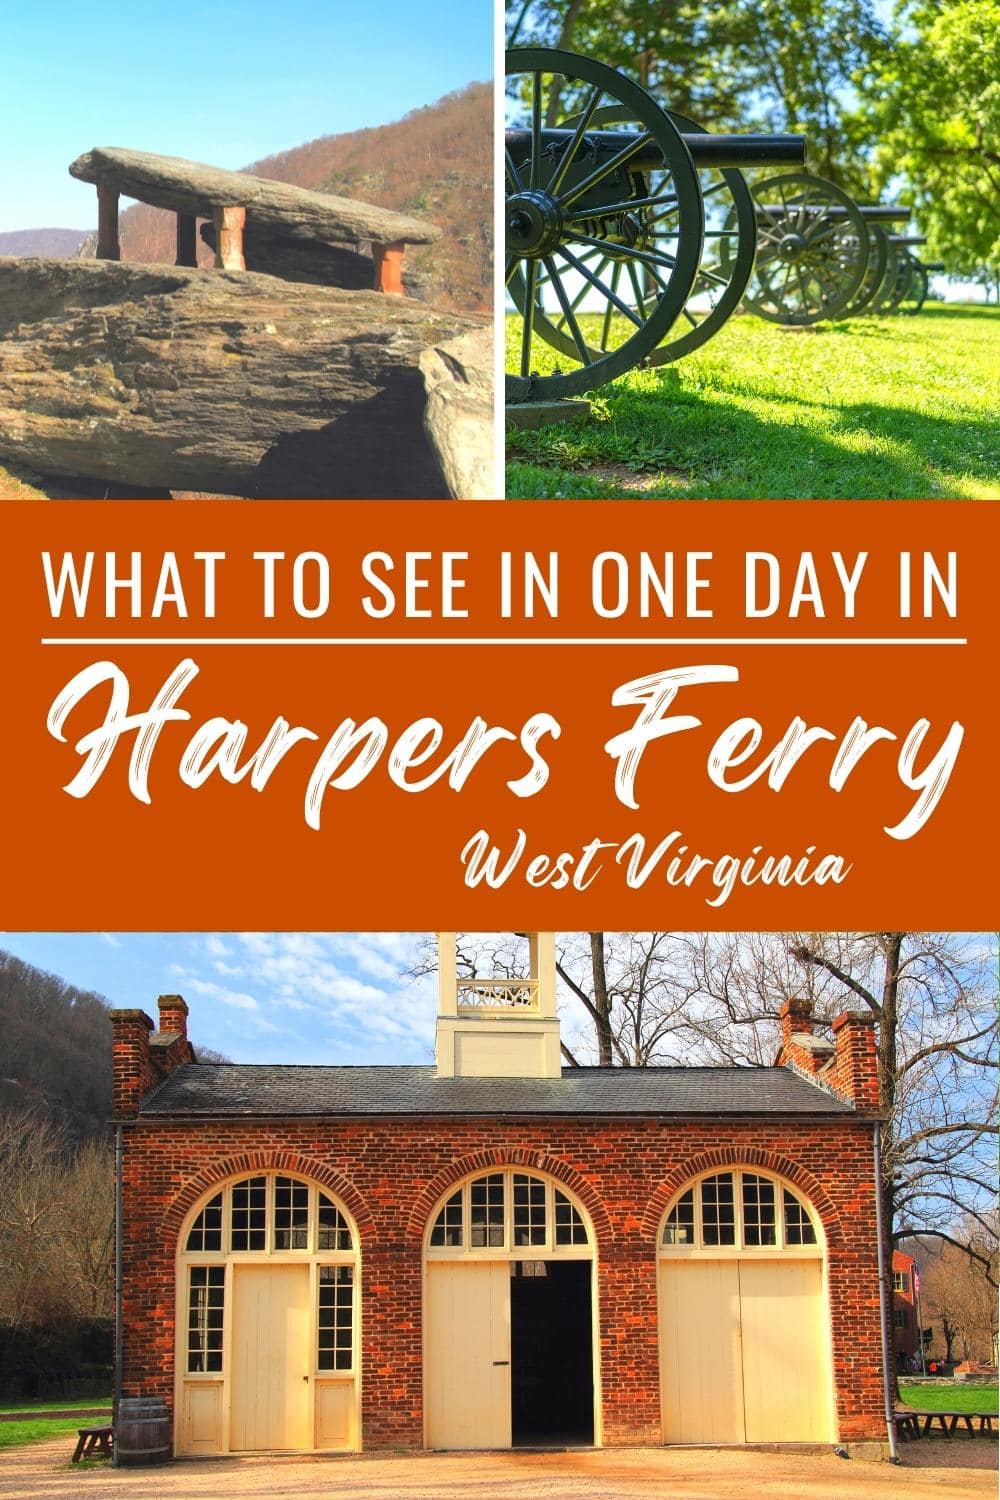 15 Best Things to Do in Harpers Ferry, WV